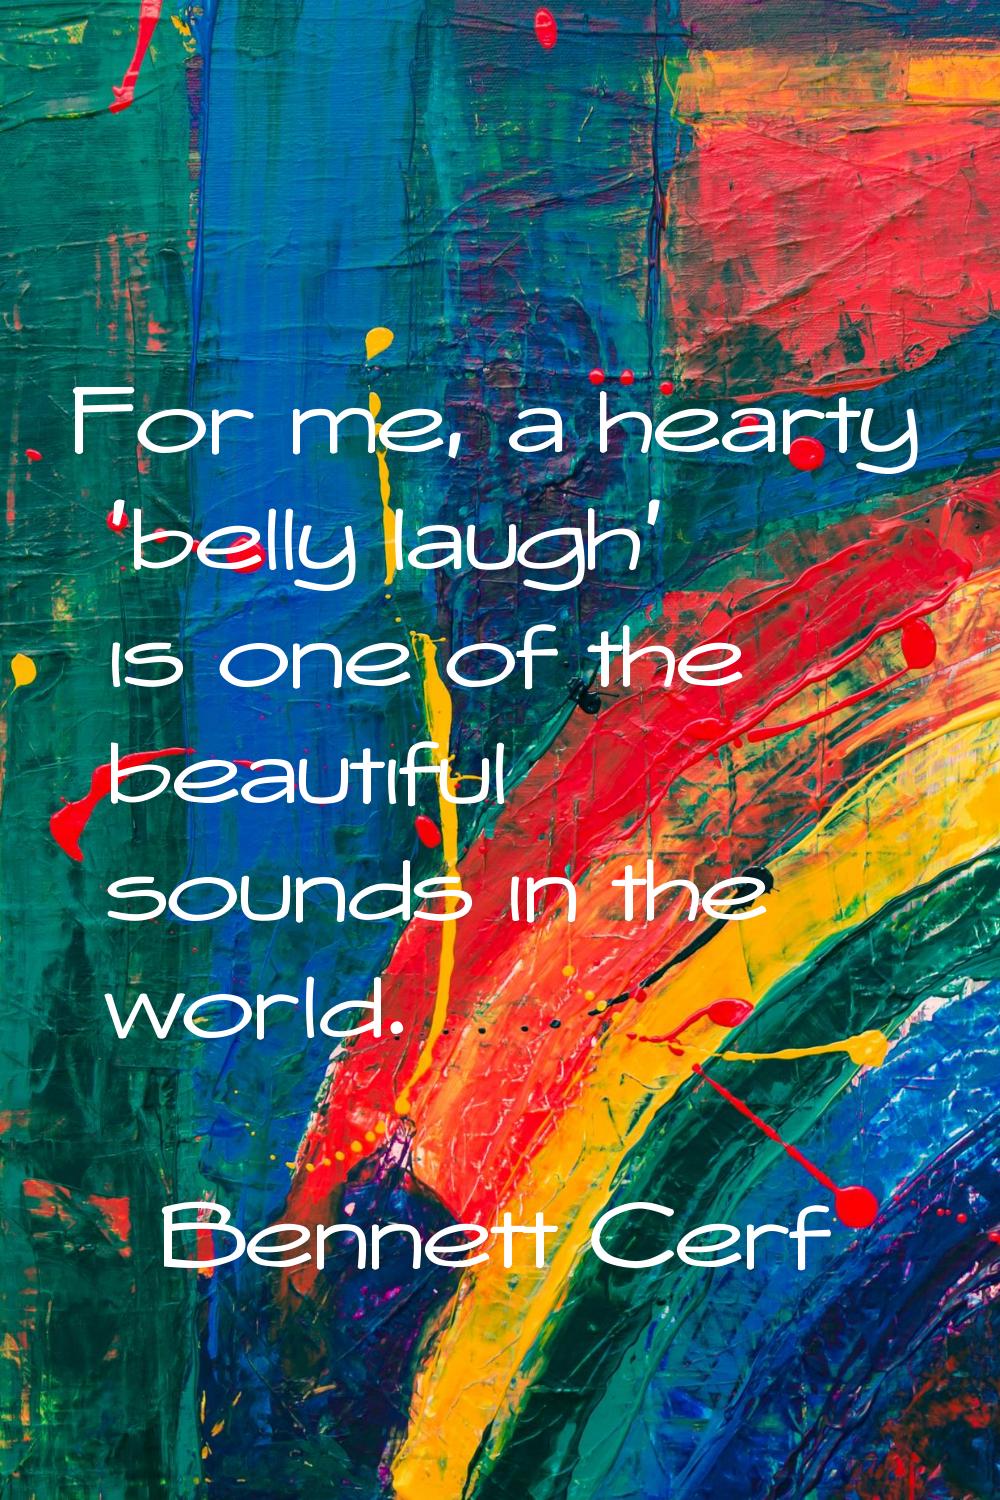 For me, a hearty 'belly laugh' is one of the beautiful sounds in the world.